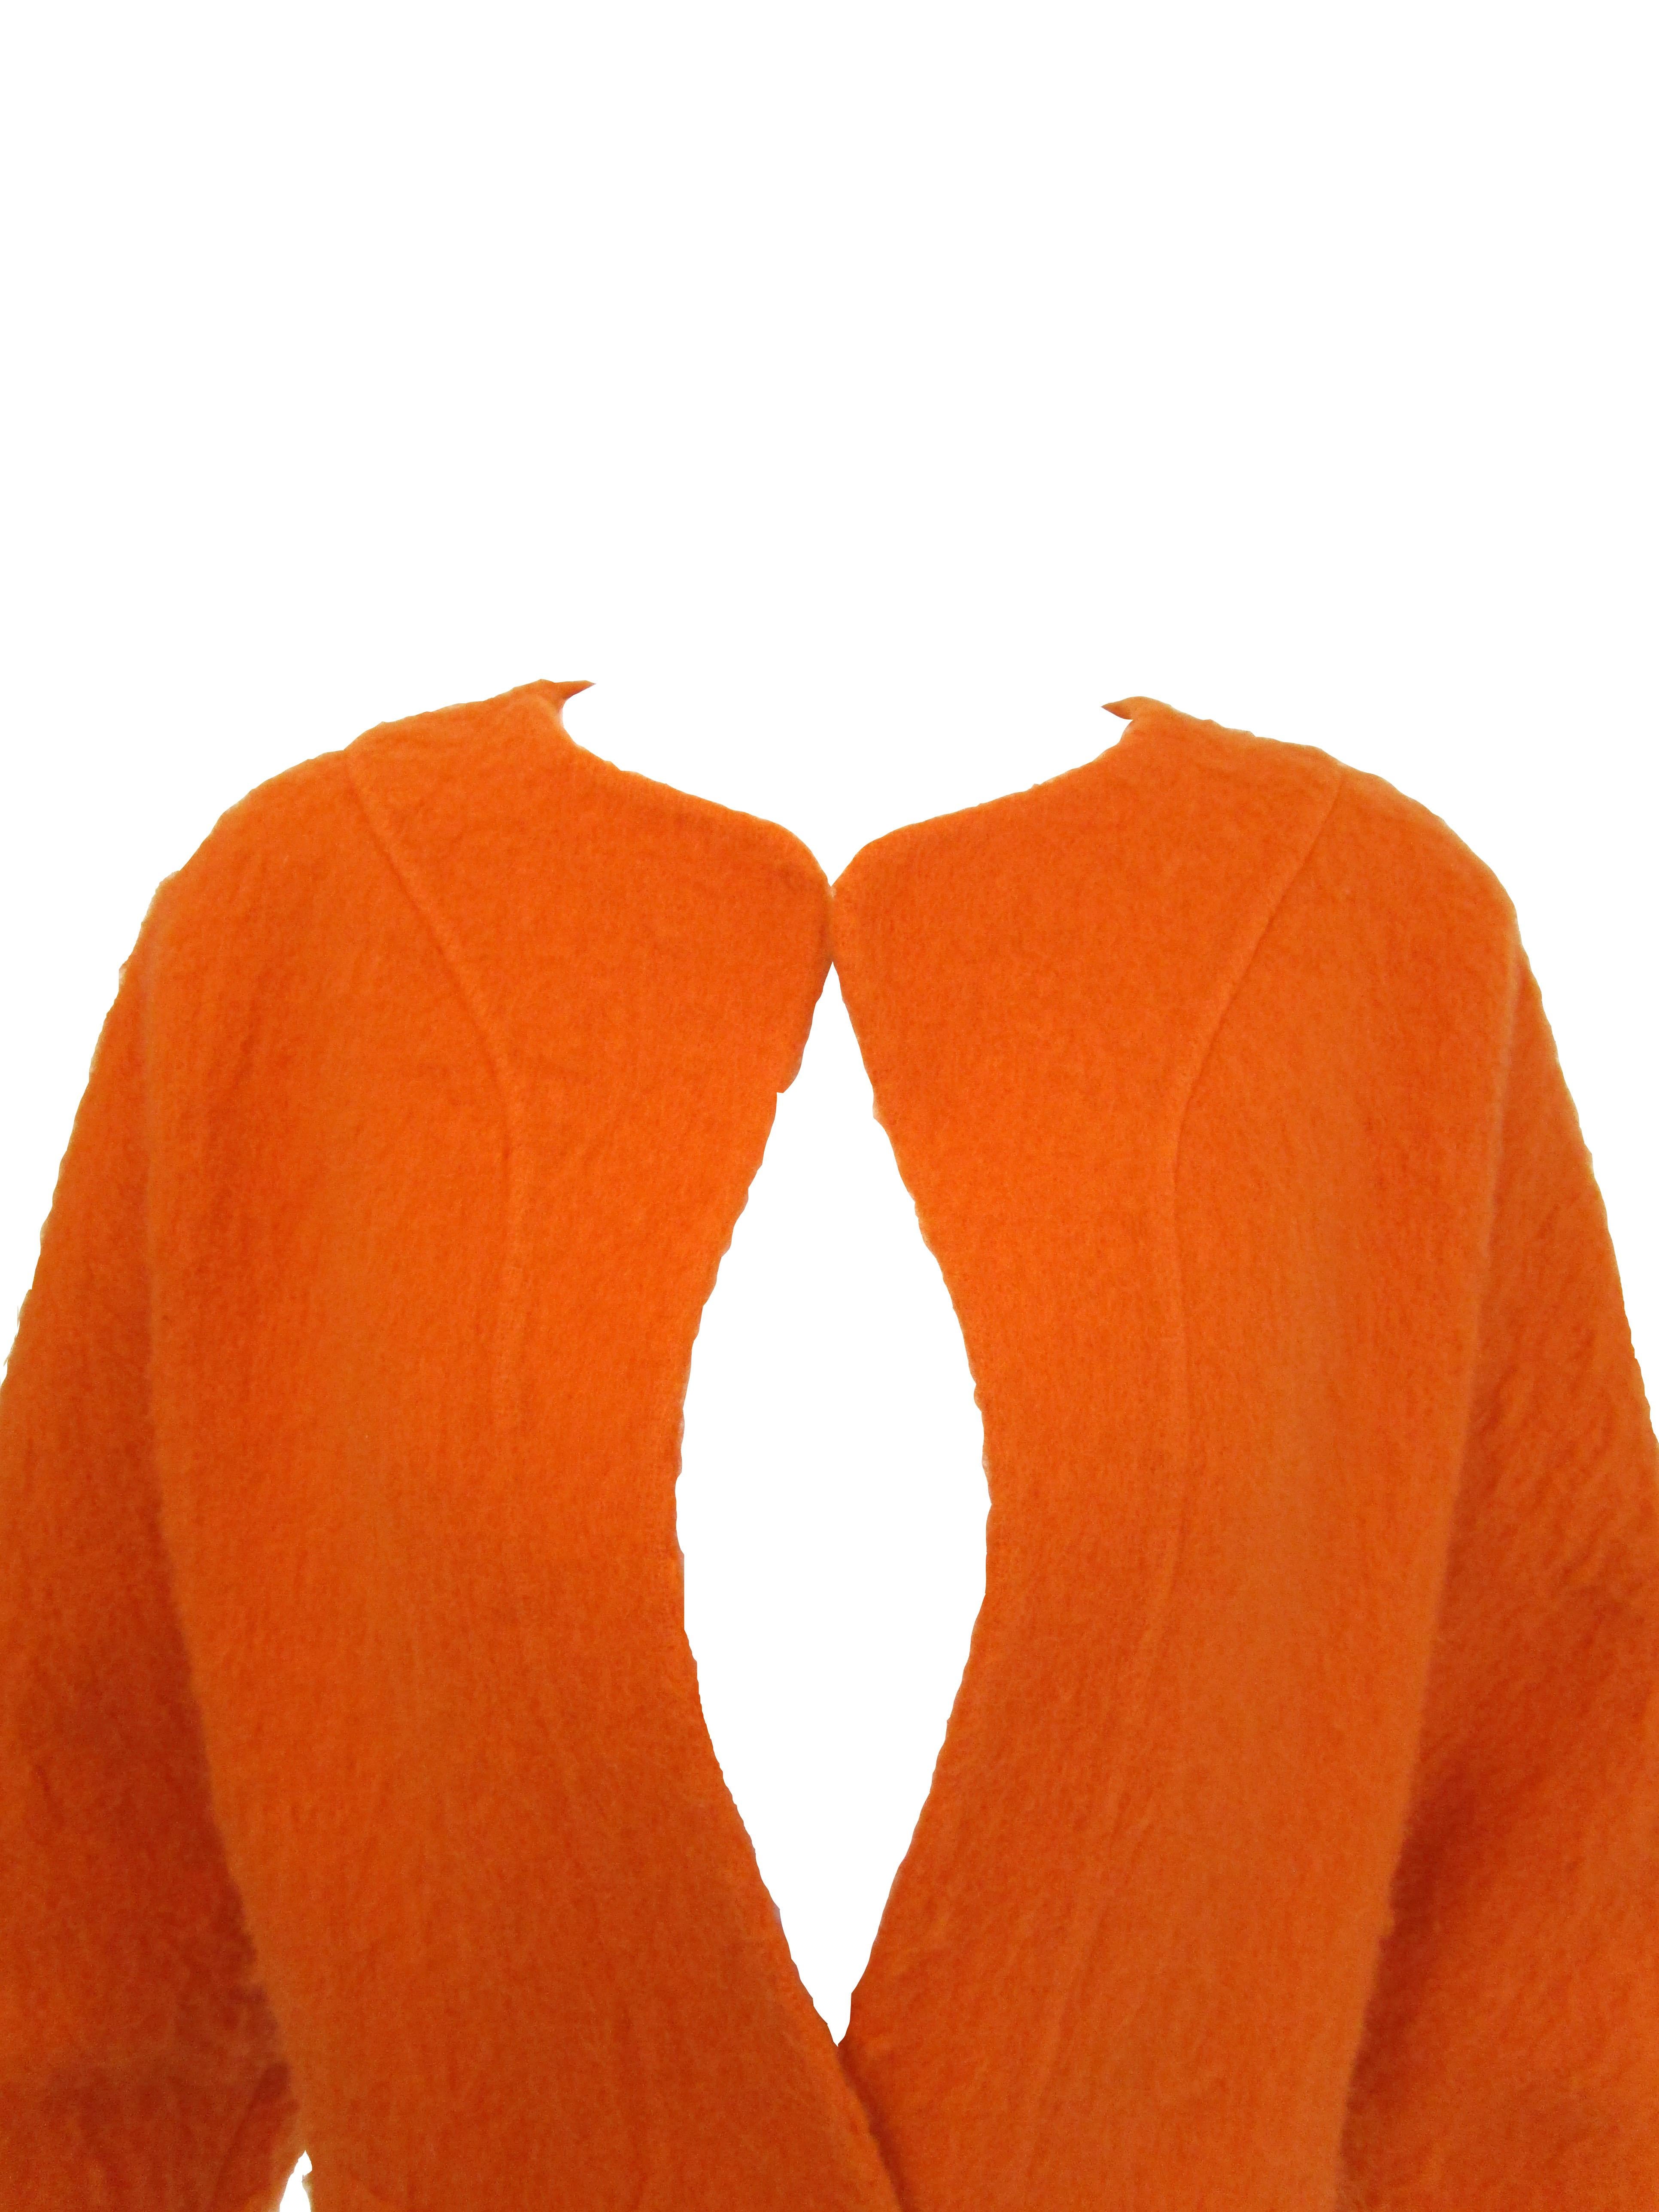  1990s Geoffery Beene Bright Orange Mohair Jacket - Cropped  In Excellent Condition For Sale In Houston, TX